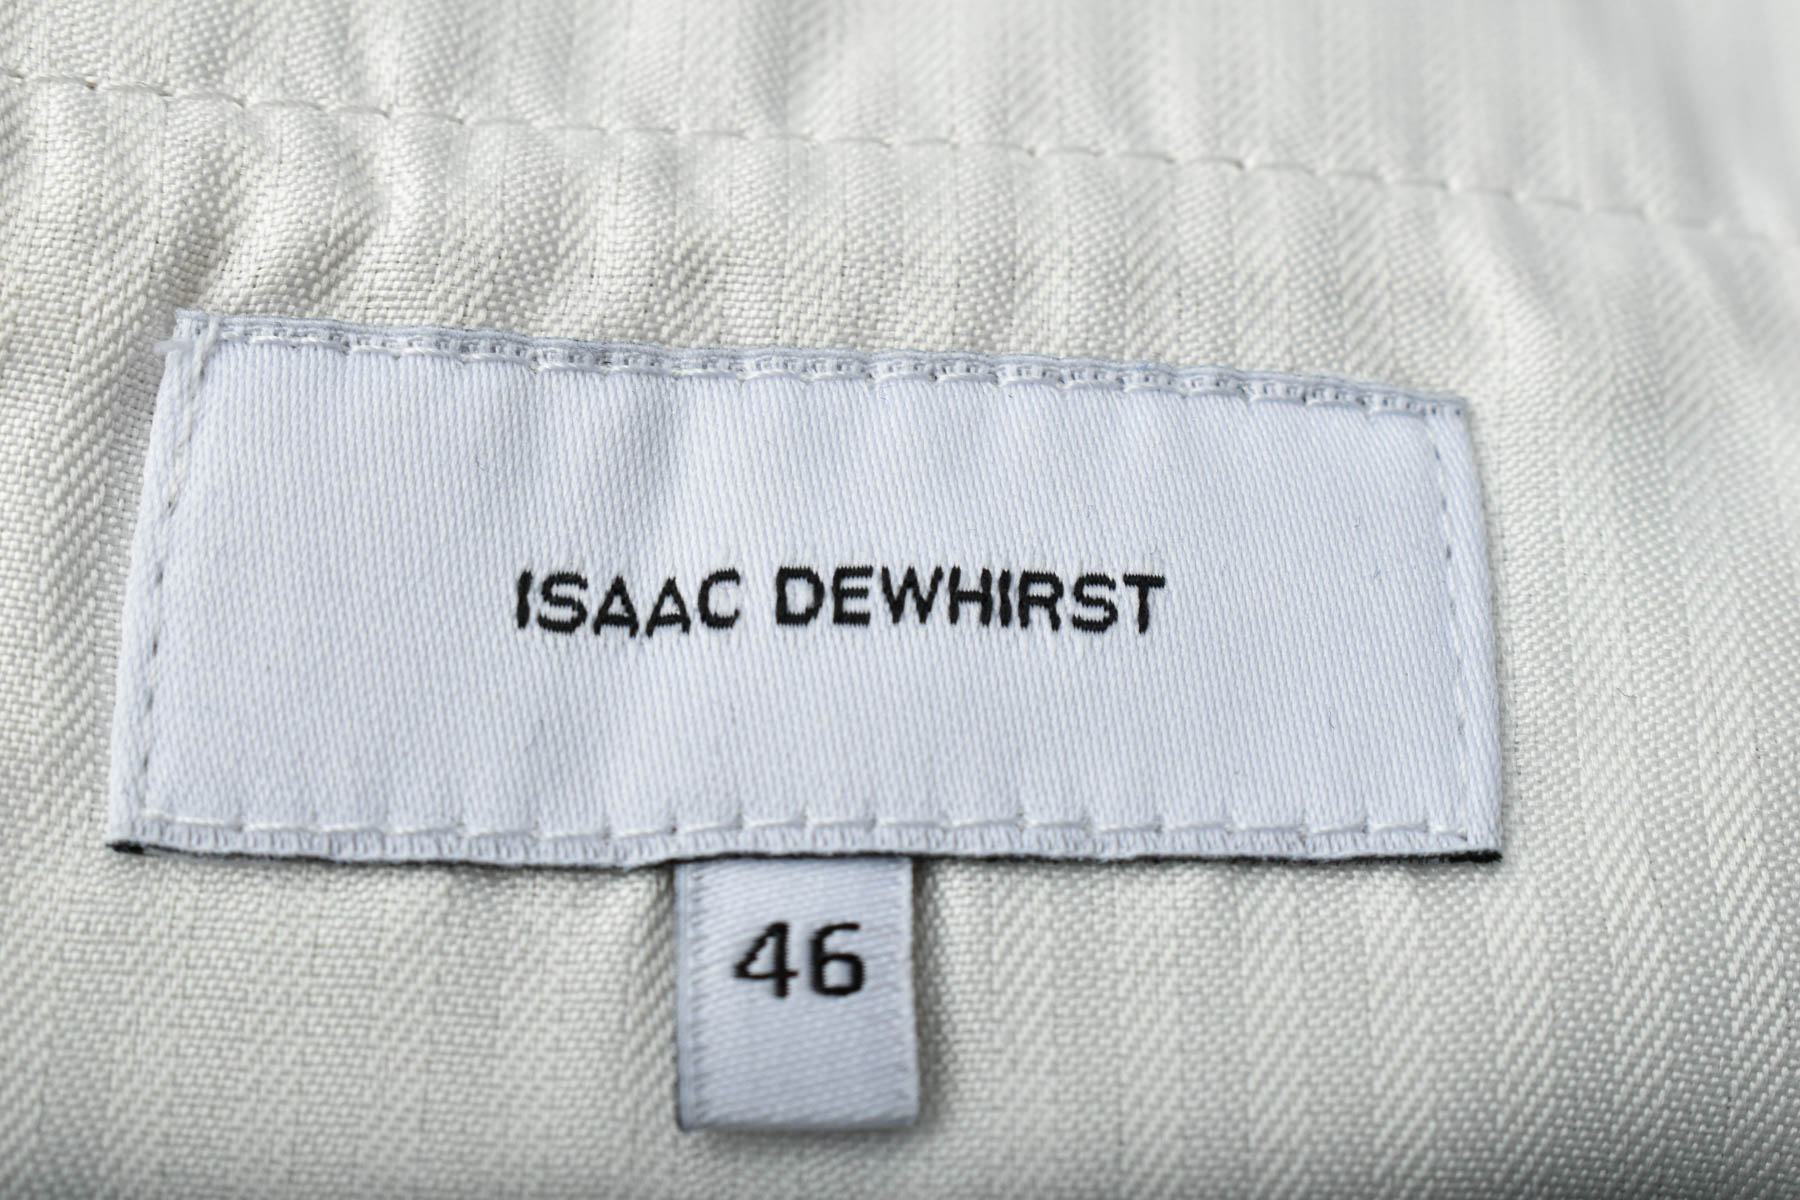 Men's trousers - ISAAC DEWHIRST - 2